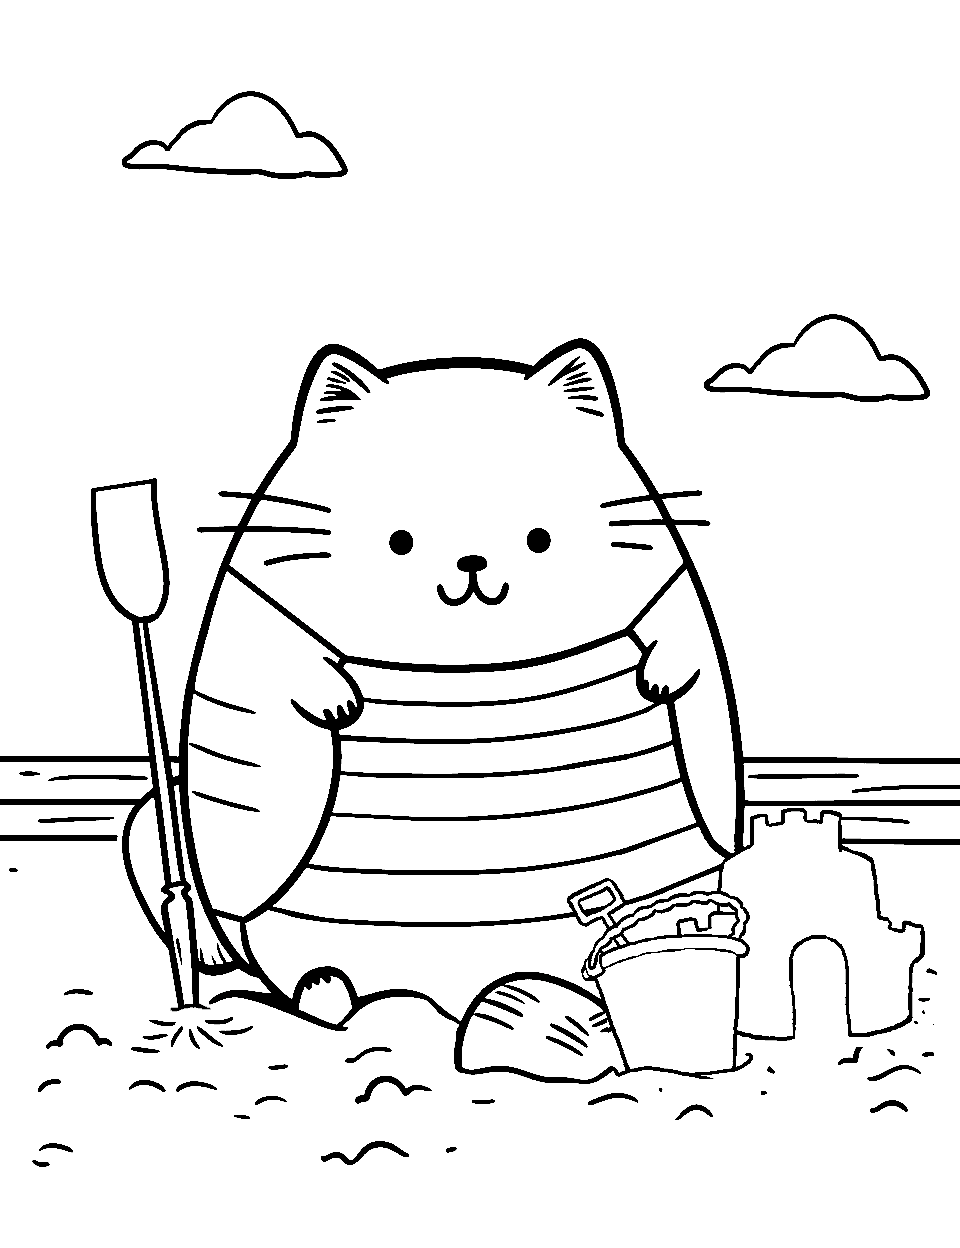 Beach Day Fun Coloring Page - Pusheen on the beach with a shovel, ready to dig up a sandcastle.